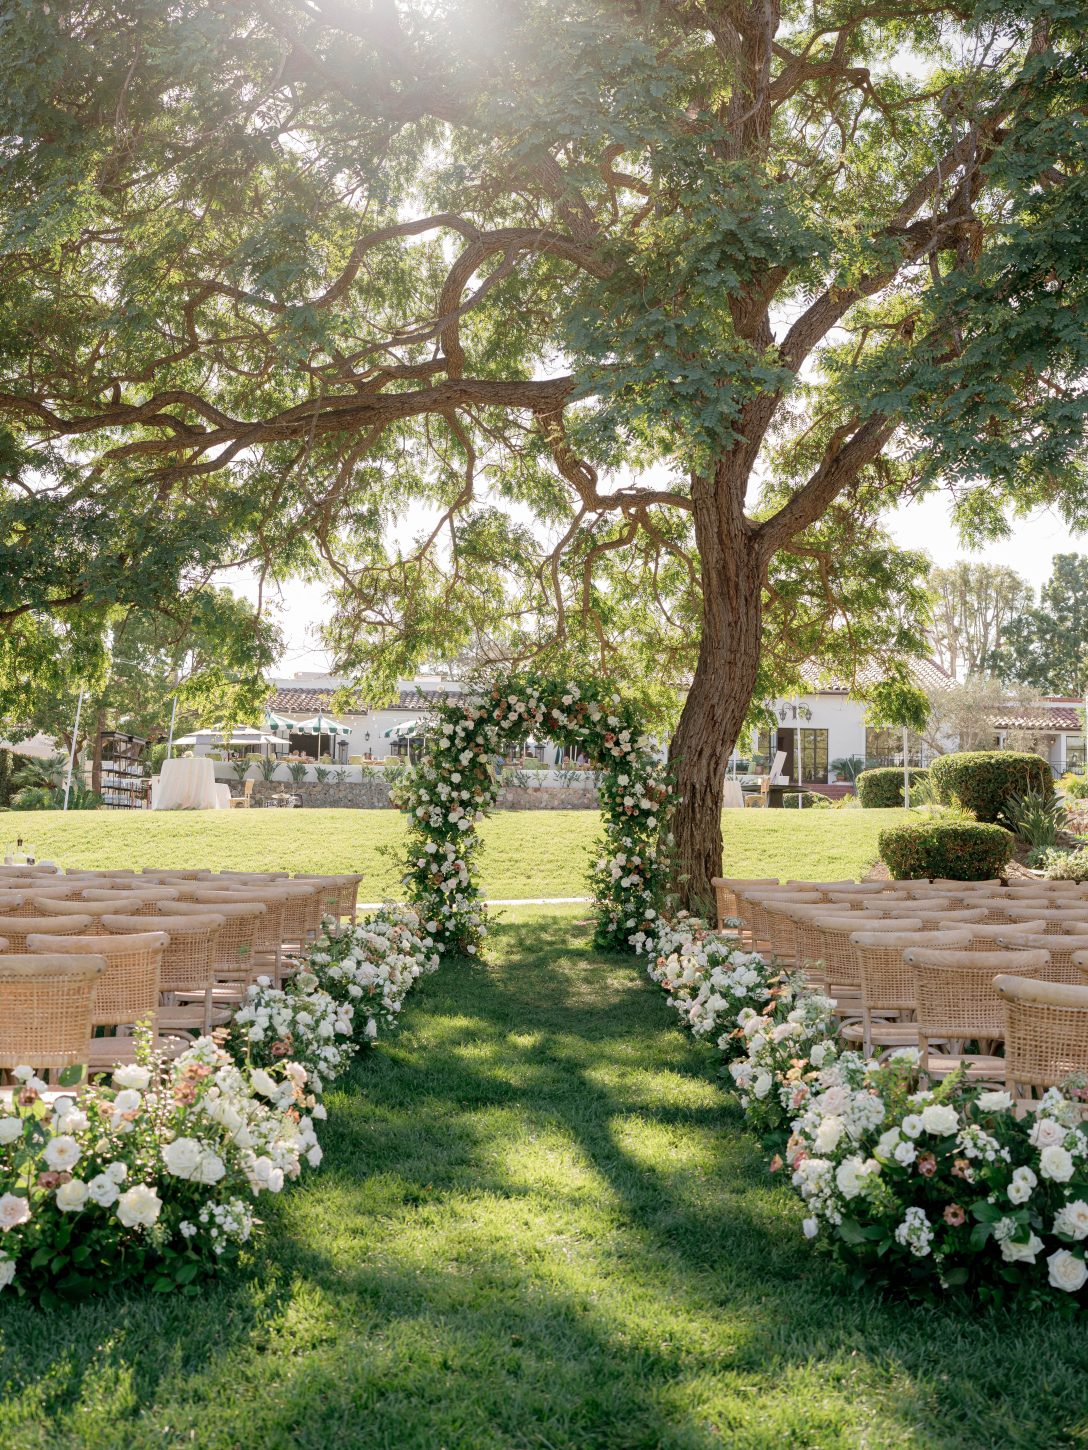 Wedding decoration in the garden of The Inn at Rancho Santa Fe with an altar at the end.